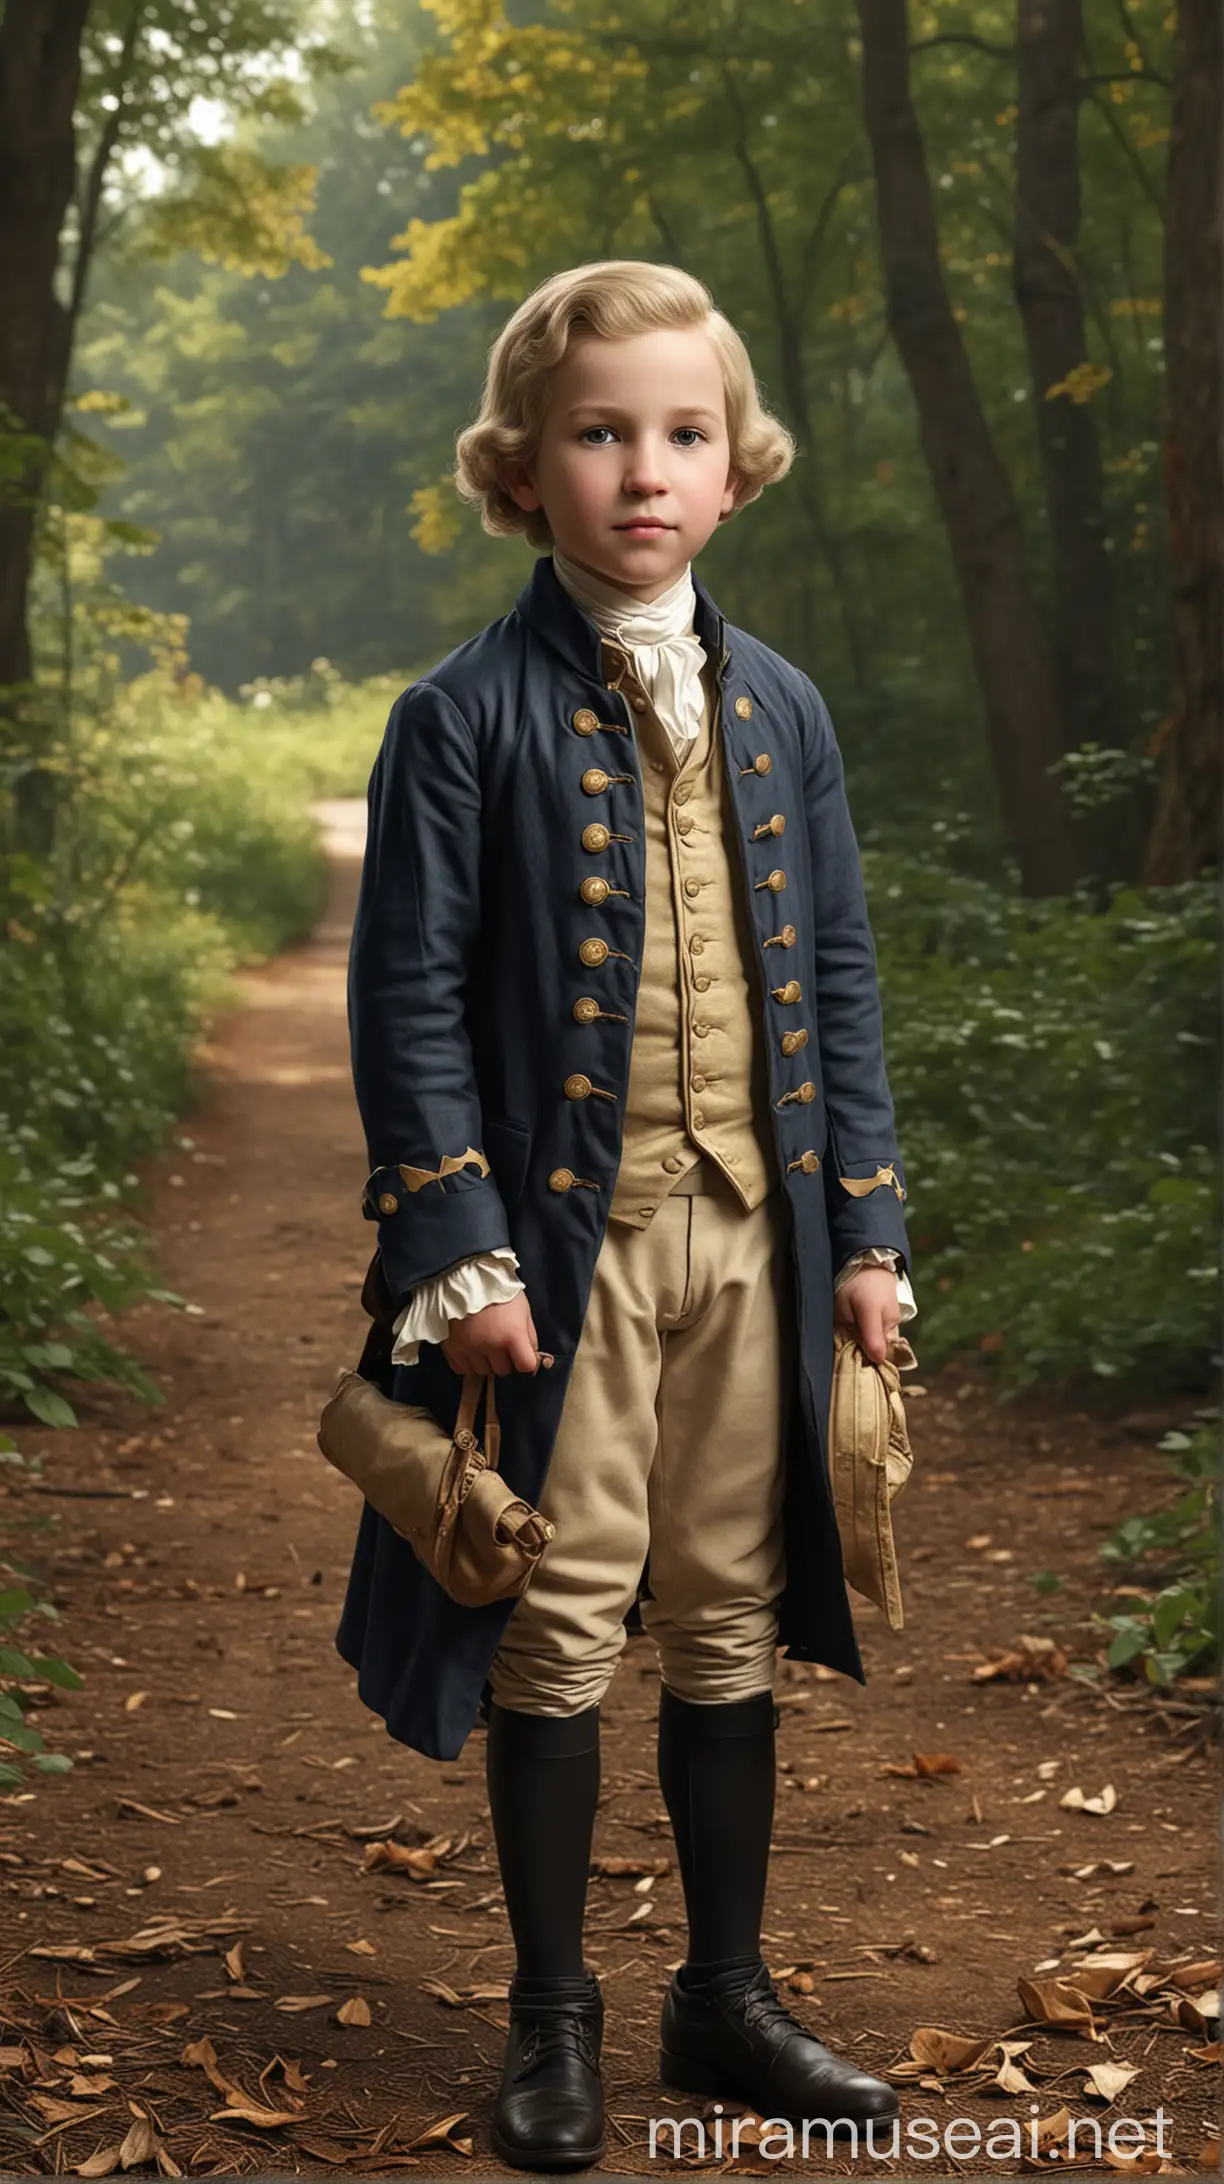 Create an image of young George Washington as a child in Virginia, showcasing his early life. hyper realistic